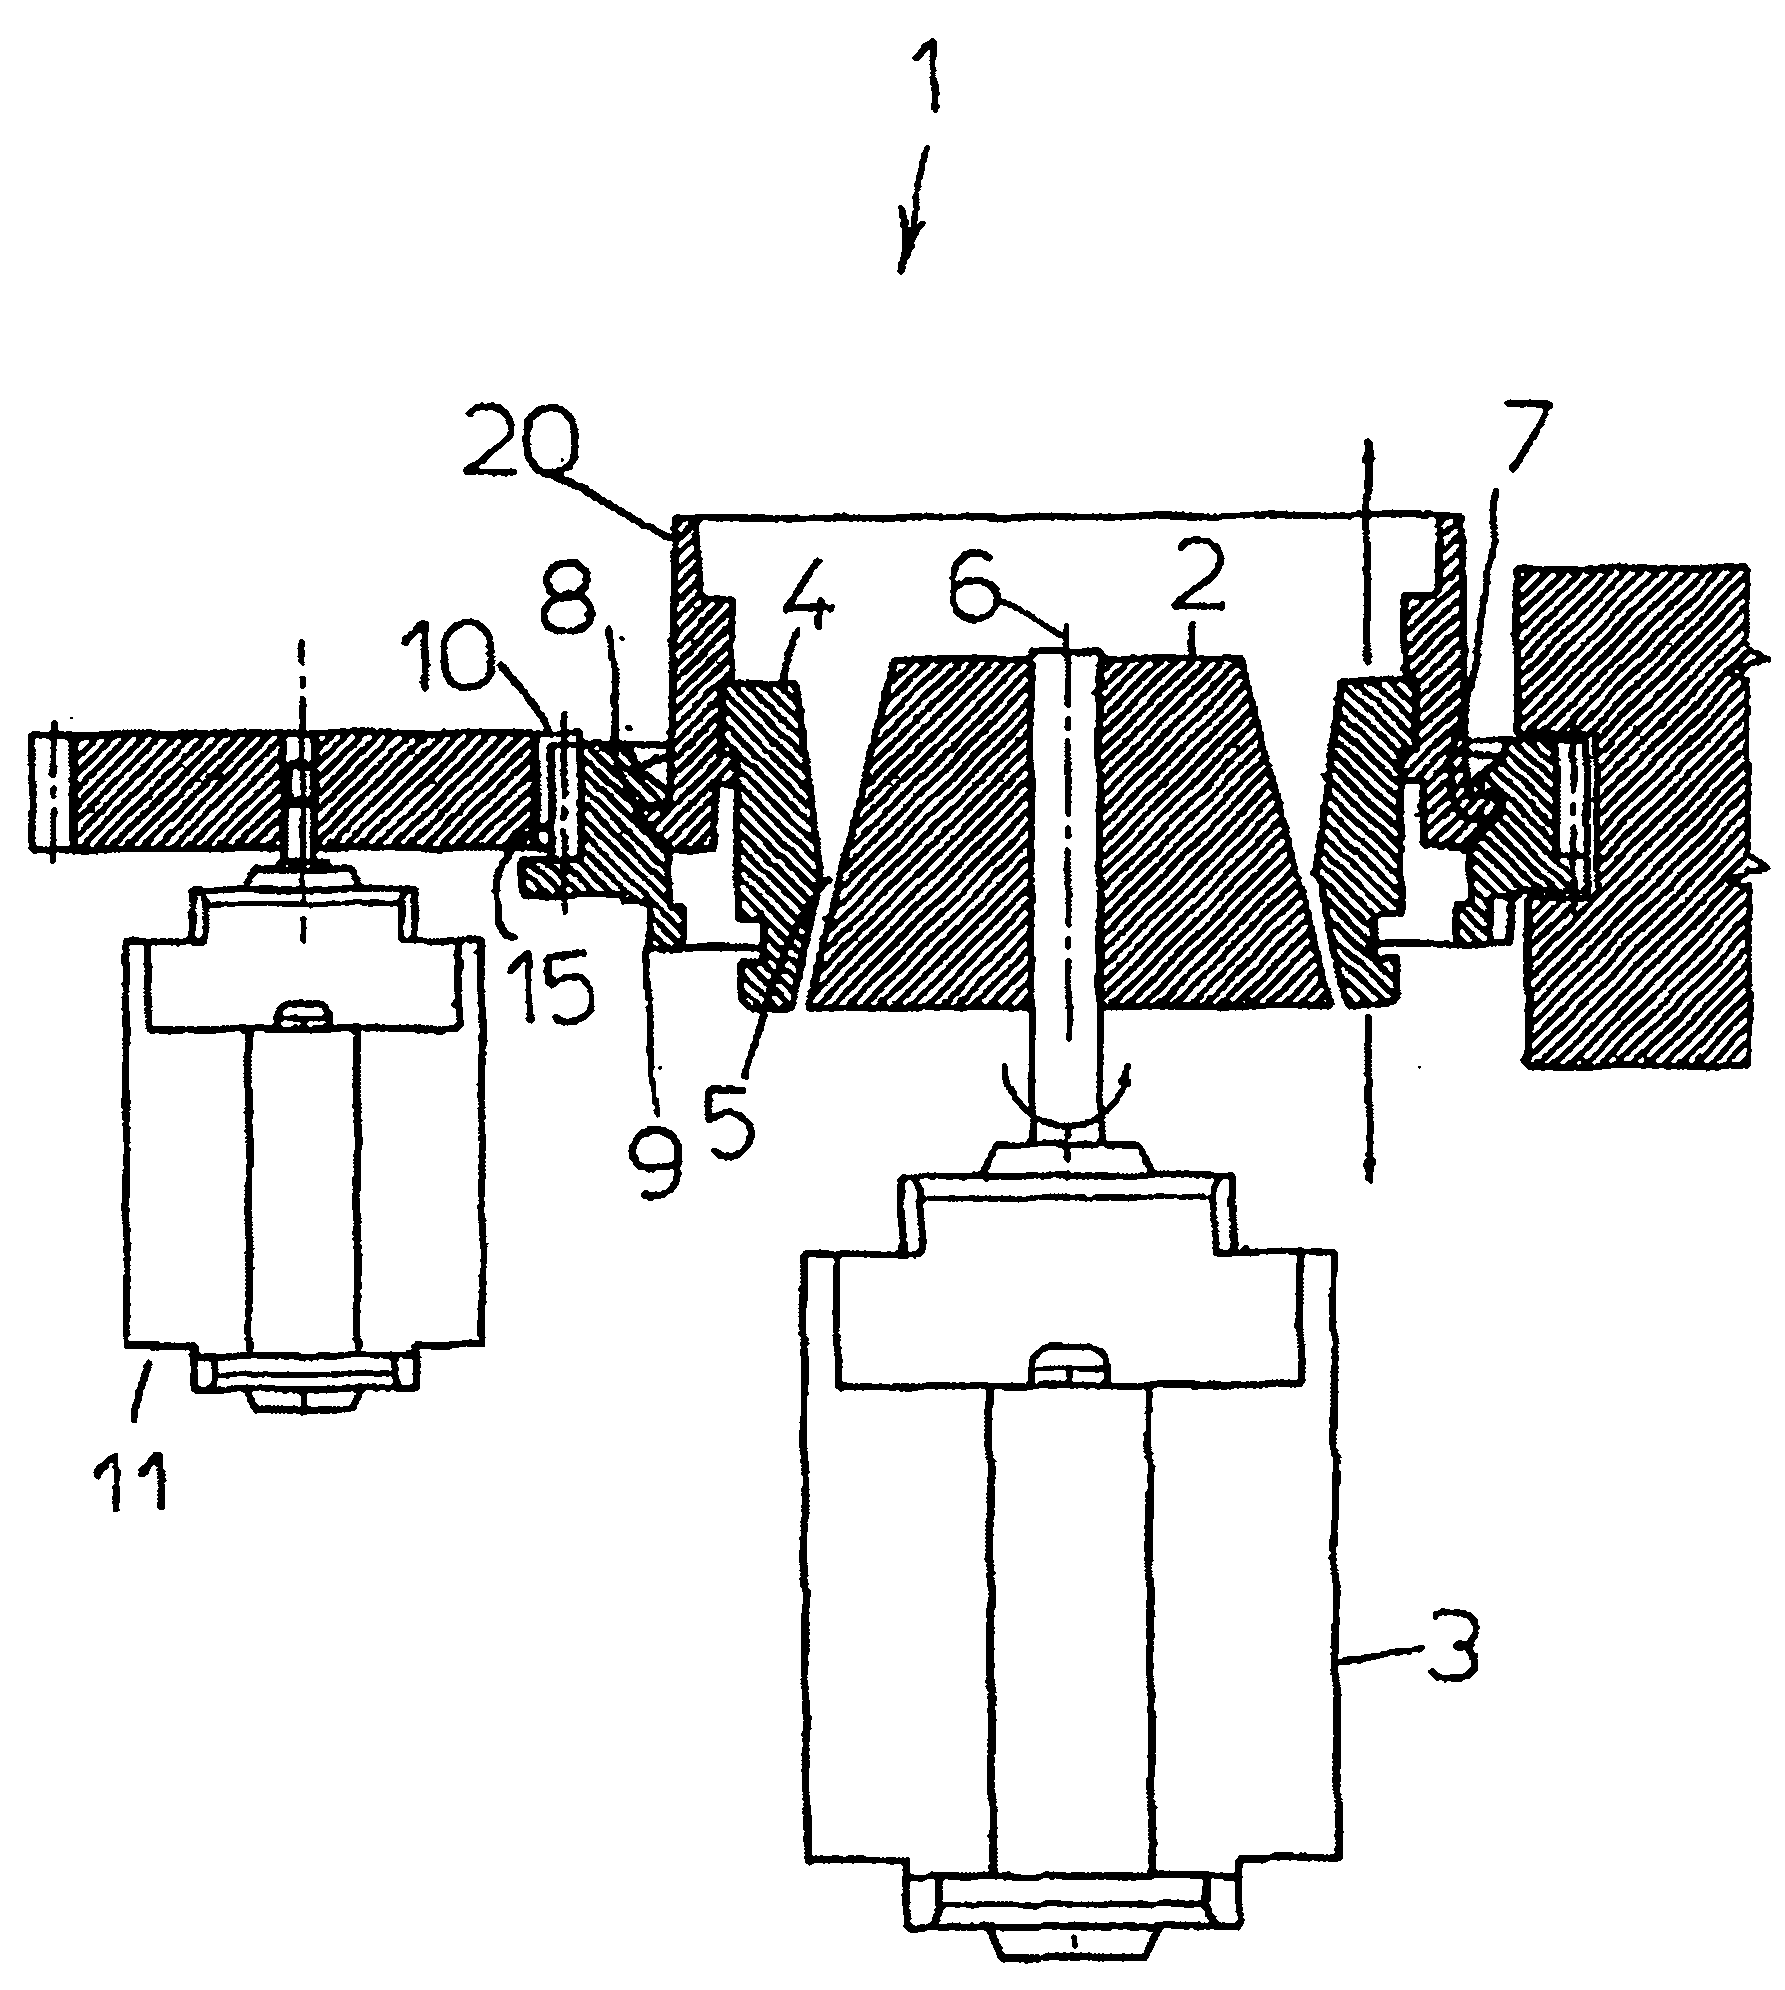 Method for controlling a coffee machine grinder